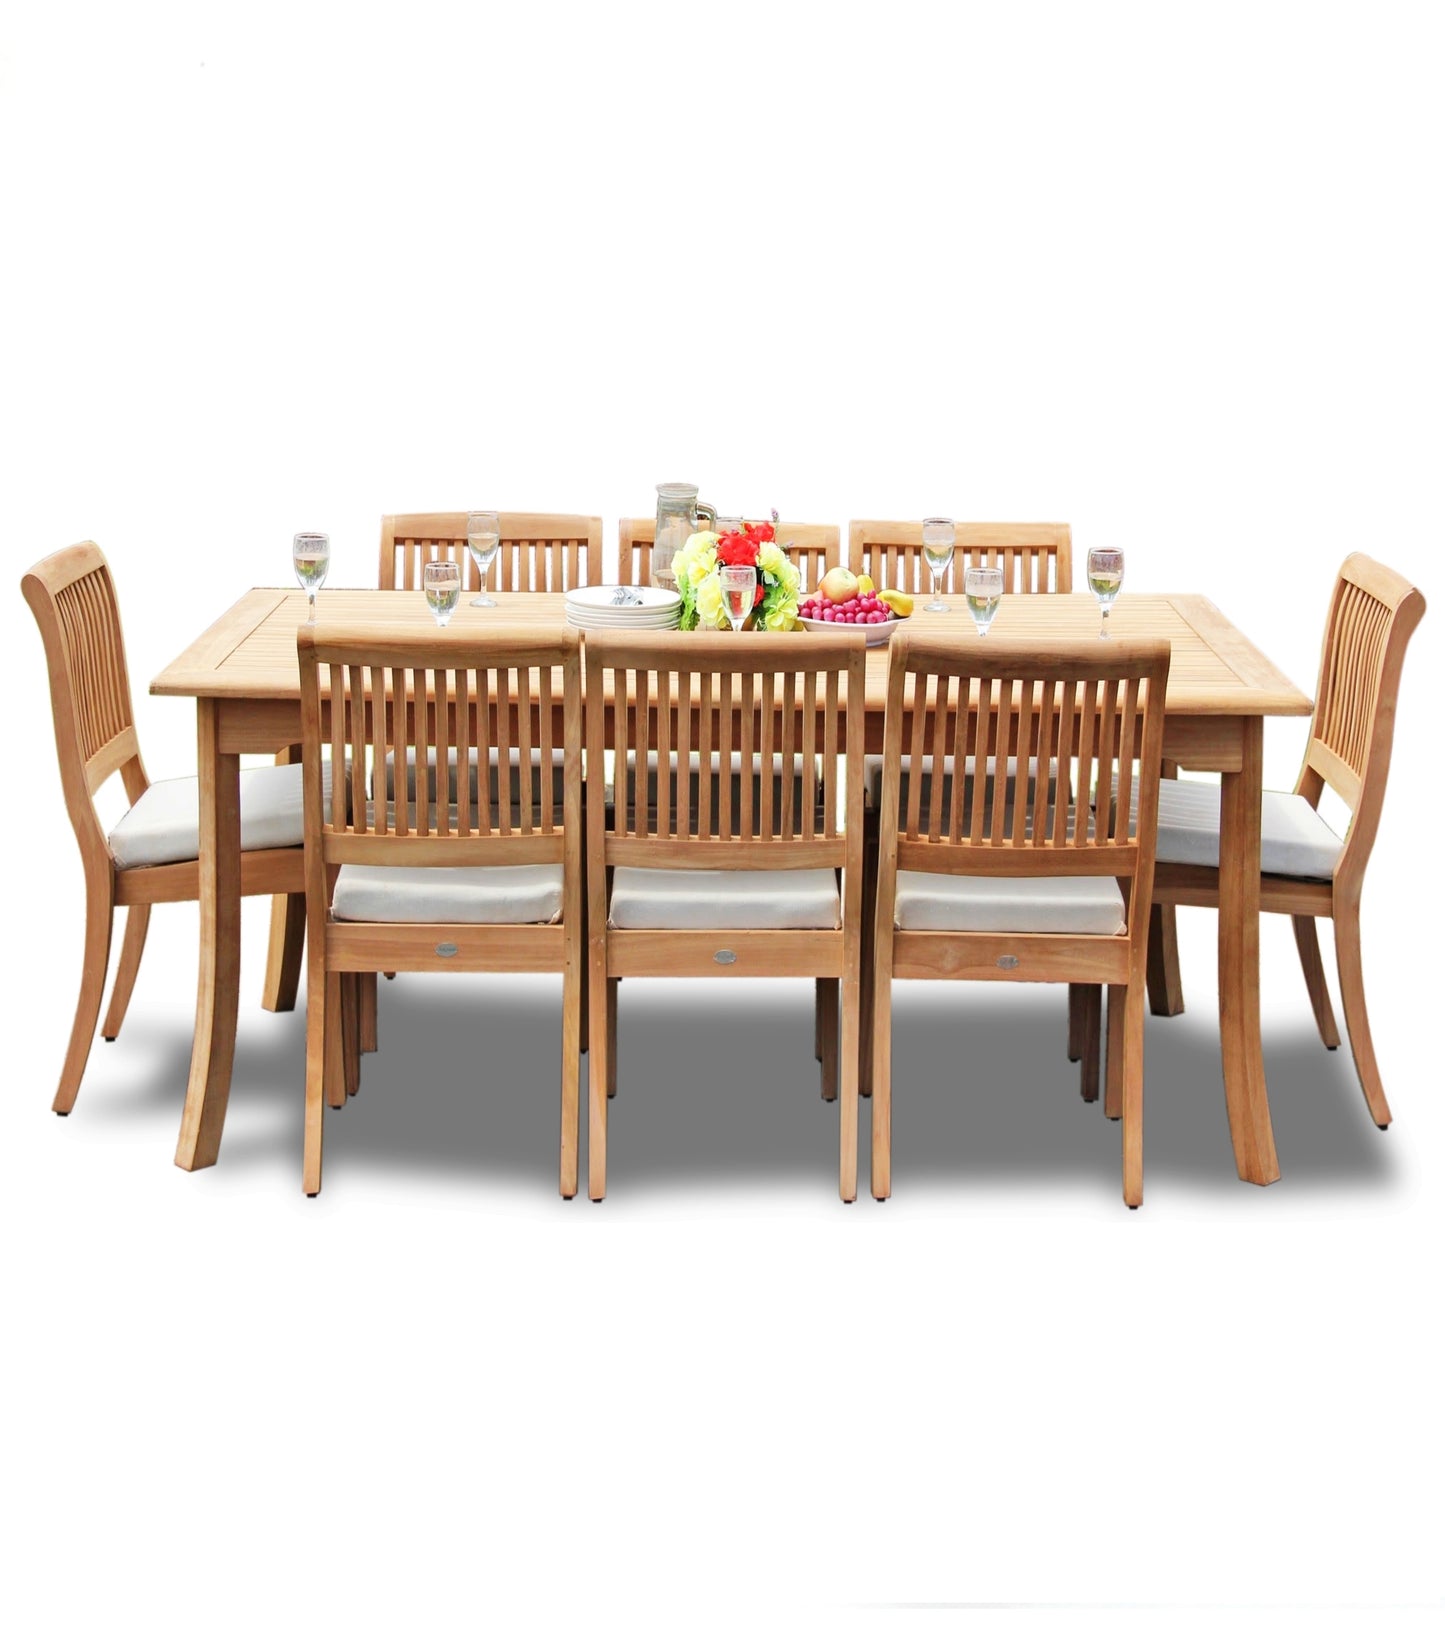 117" Rectangle Table with Arbor Armless Chairs